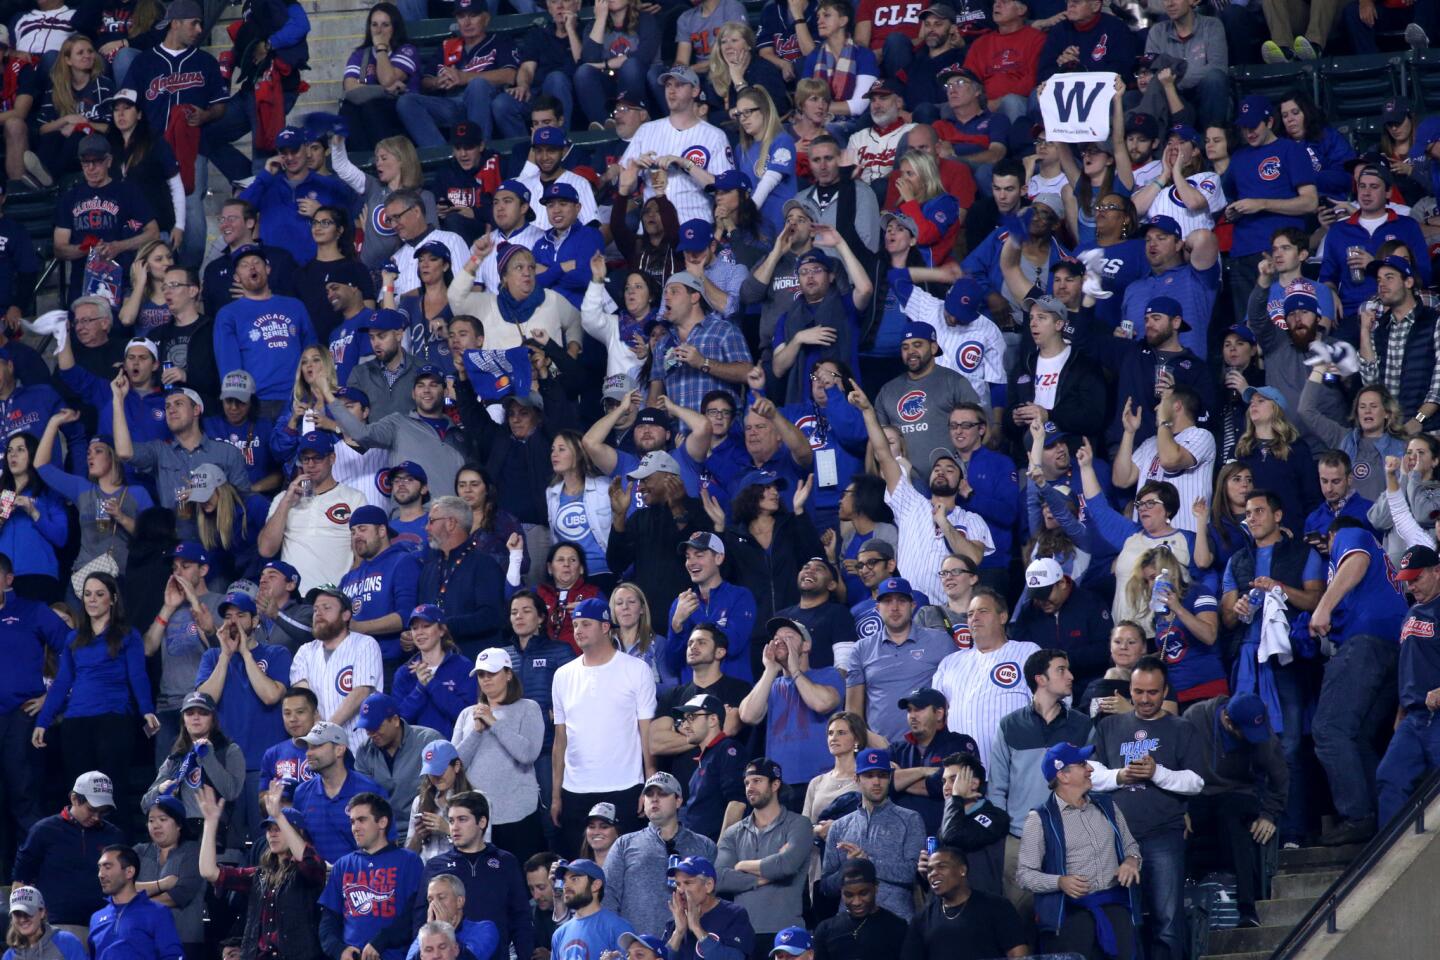 Chicago Cubs fans celebrate after first baseman Anthony Rizzo (44) hit a two-run home run in the ninth inning of Game 6 of the World Series on Nov. 1, 2016.